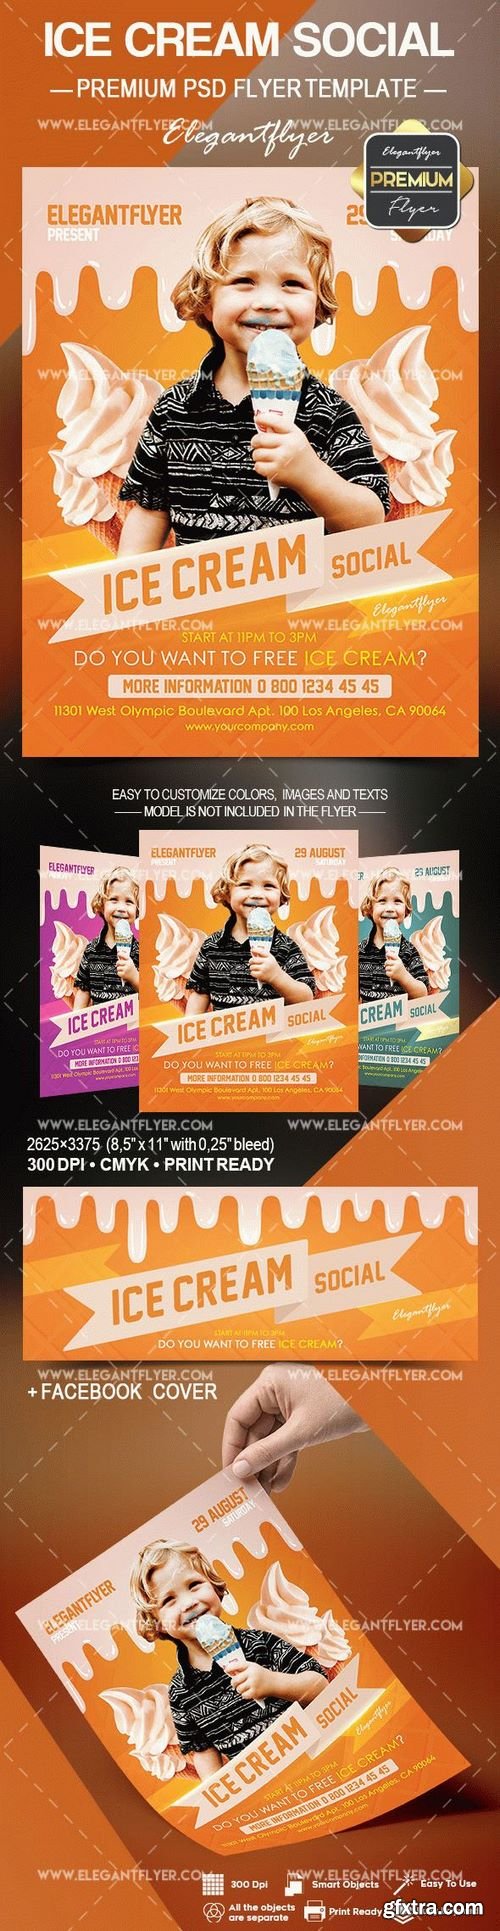 Ice Cream Social Flyer Template from www.gfxtra31.com